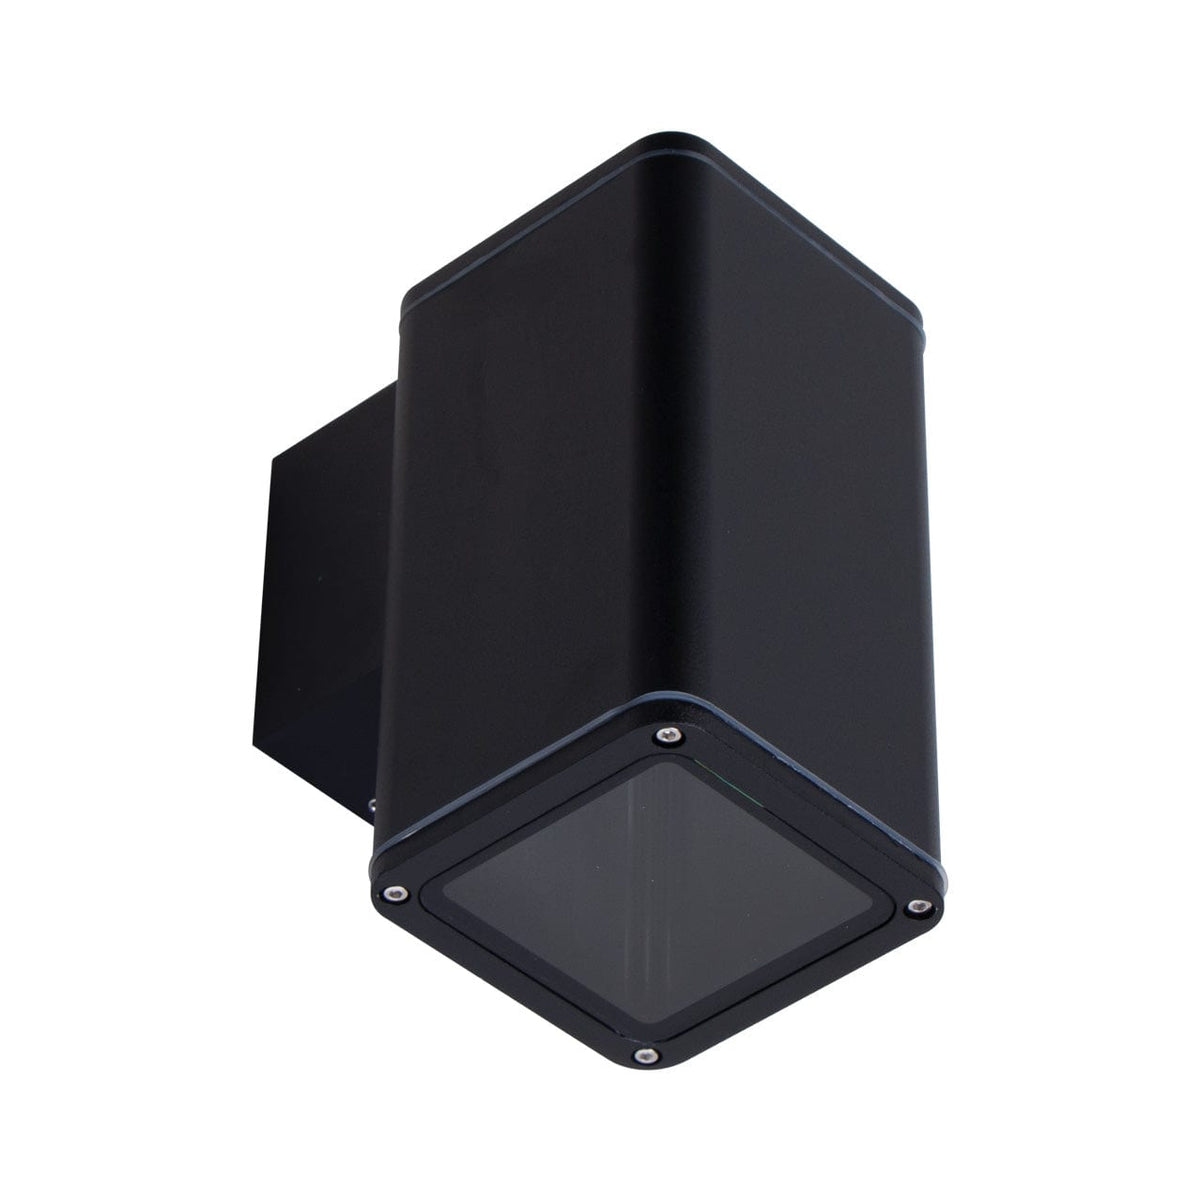 Domus Lighting Outdoor Wall Lights BLACK / NO LAMP DOMUS PIPER-1 SQUARE LED WALL LIGHT Lights-For-You 49260